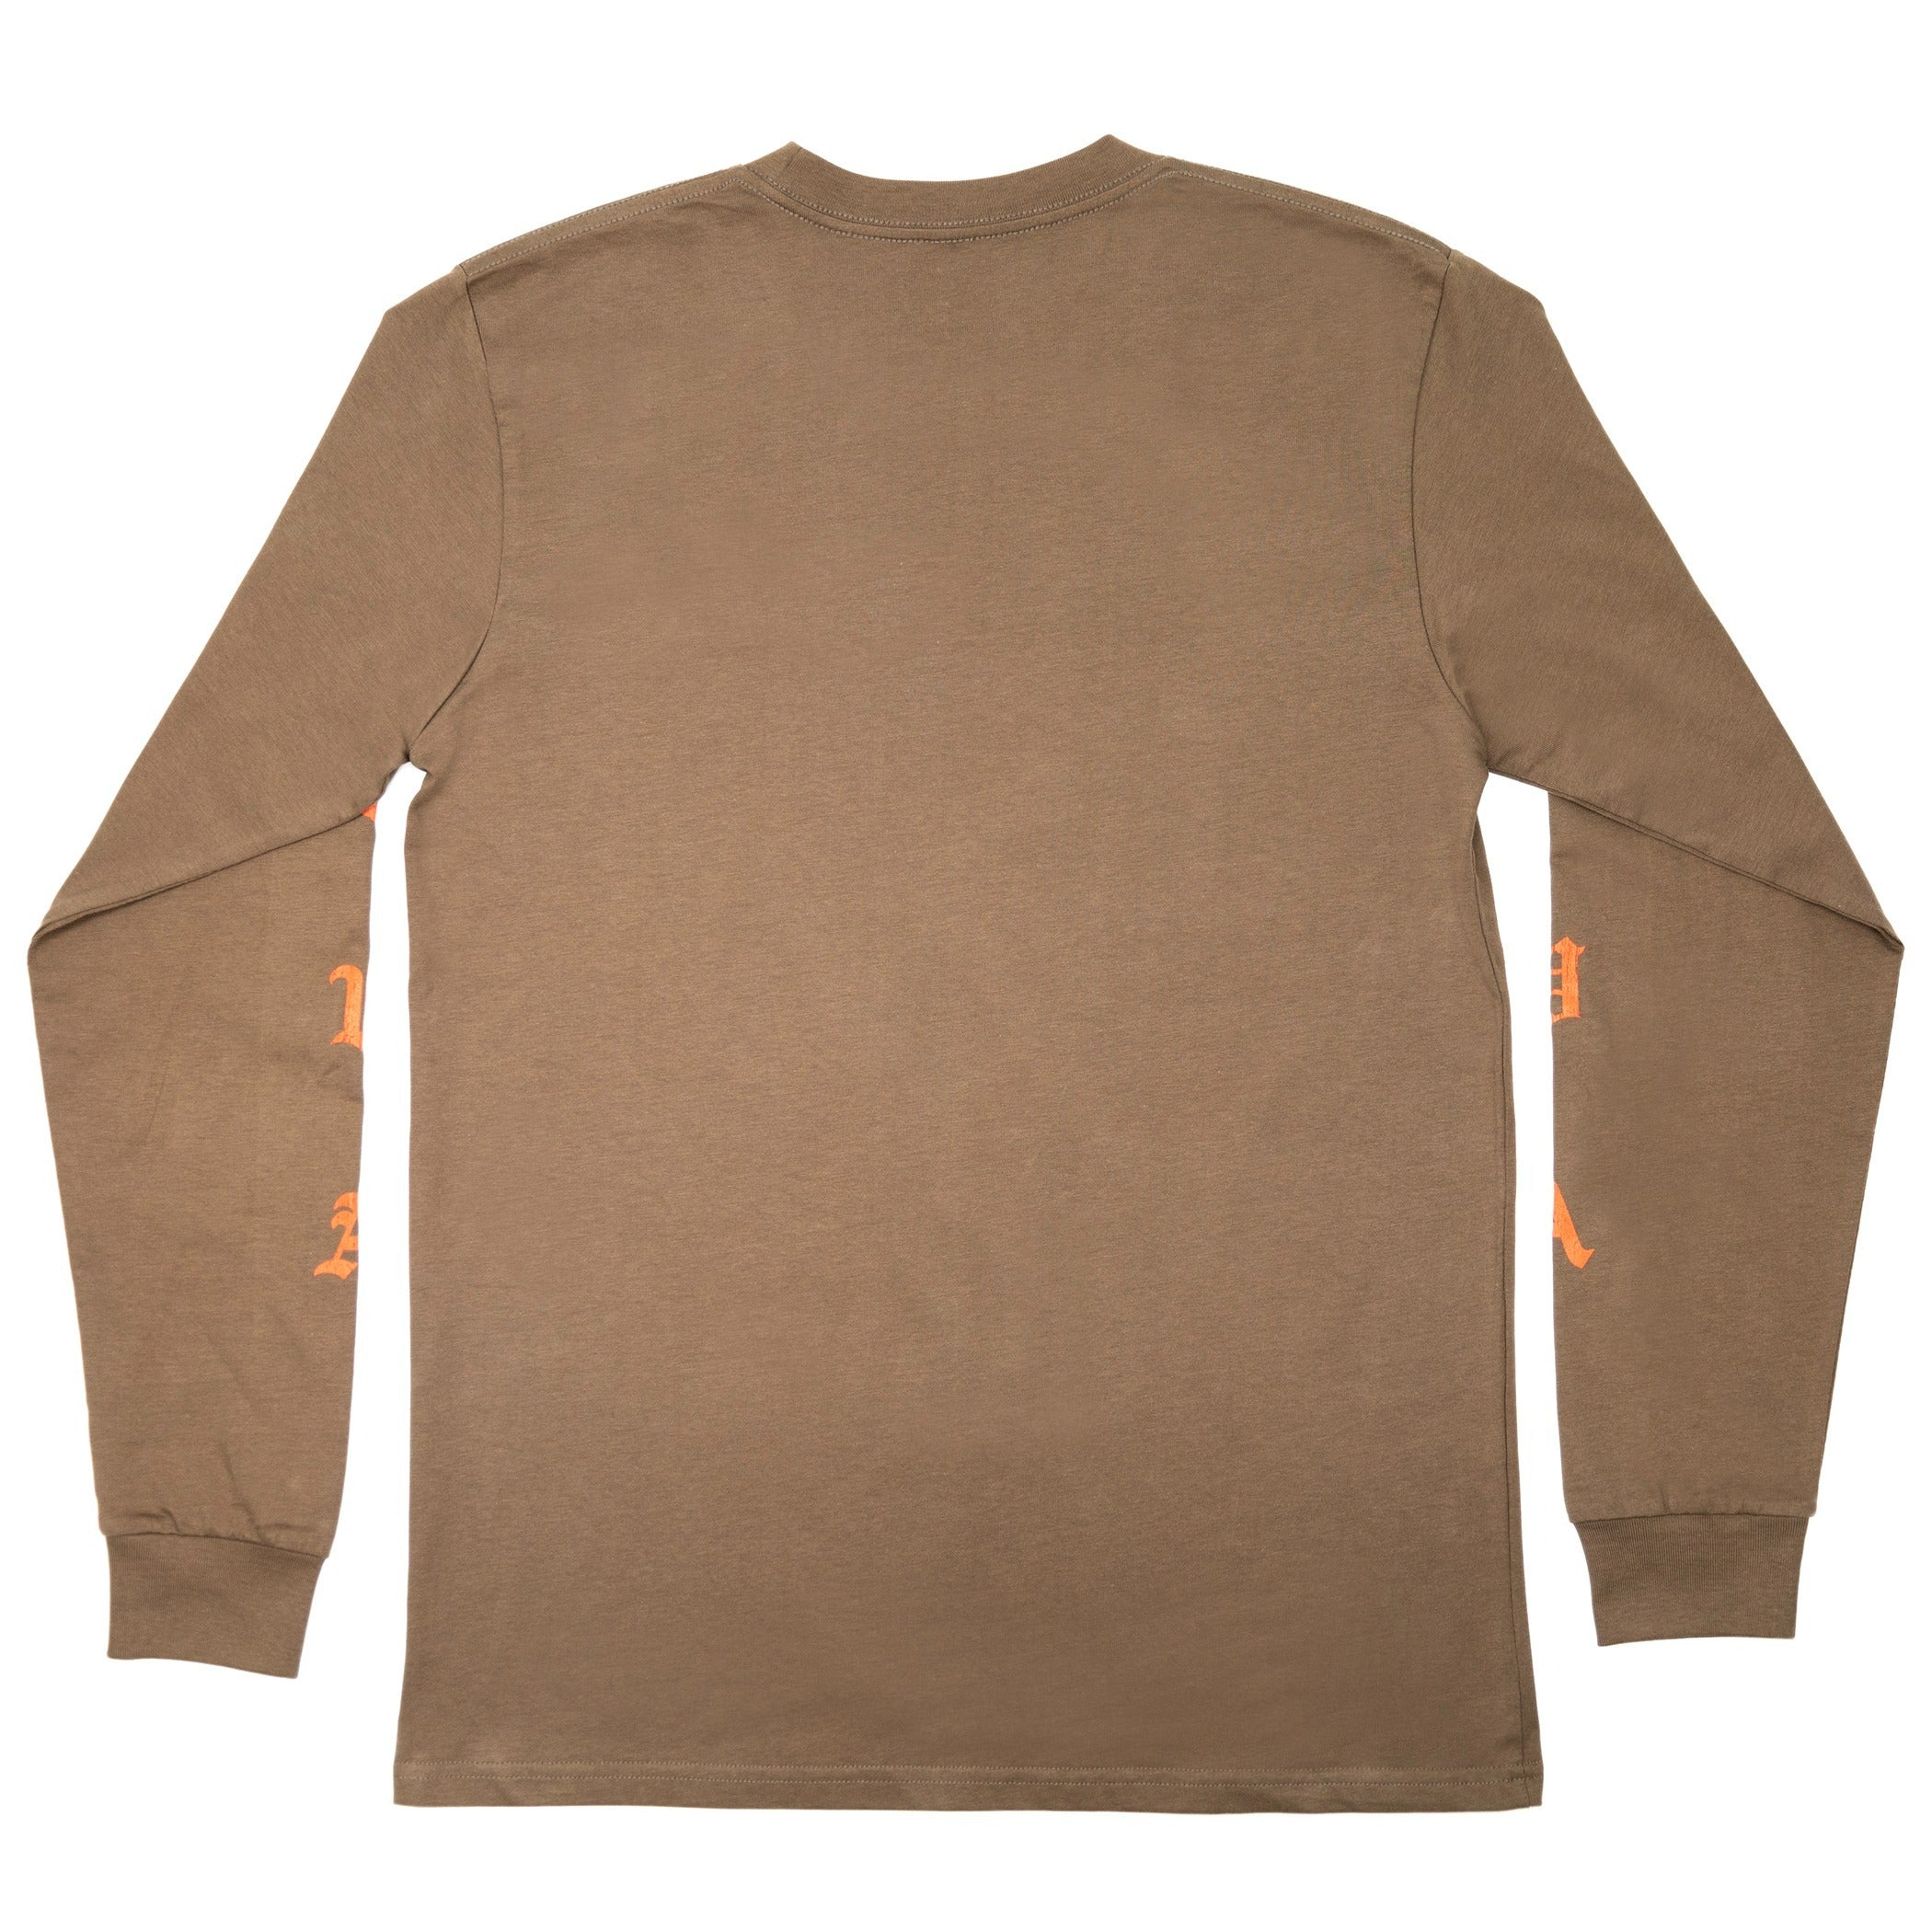 BACK VIEW OF BROWN ONO LONGSLEEVE. NO LOGO.